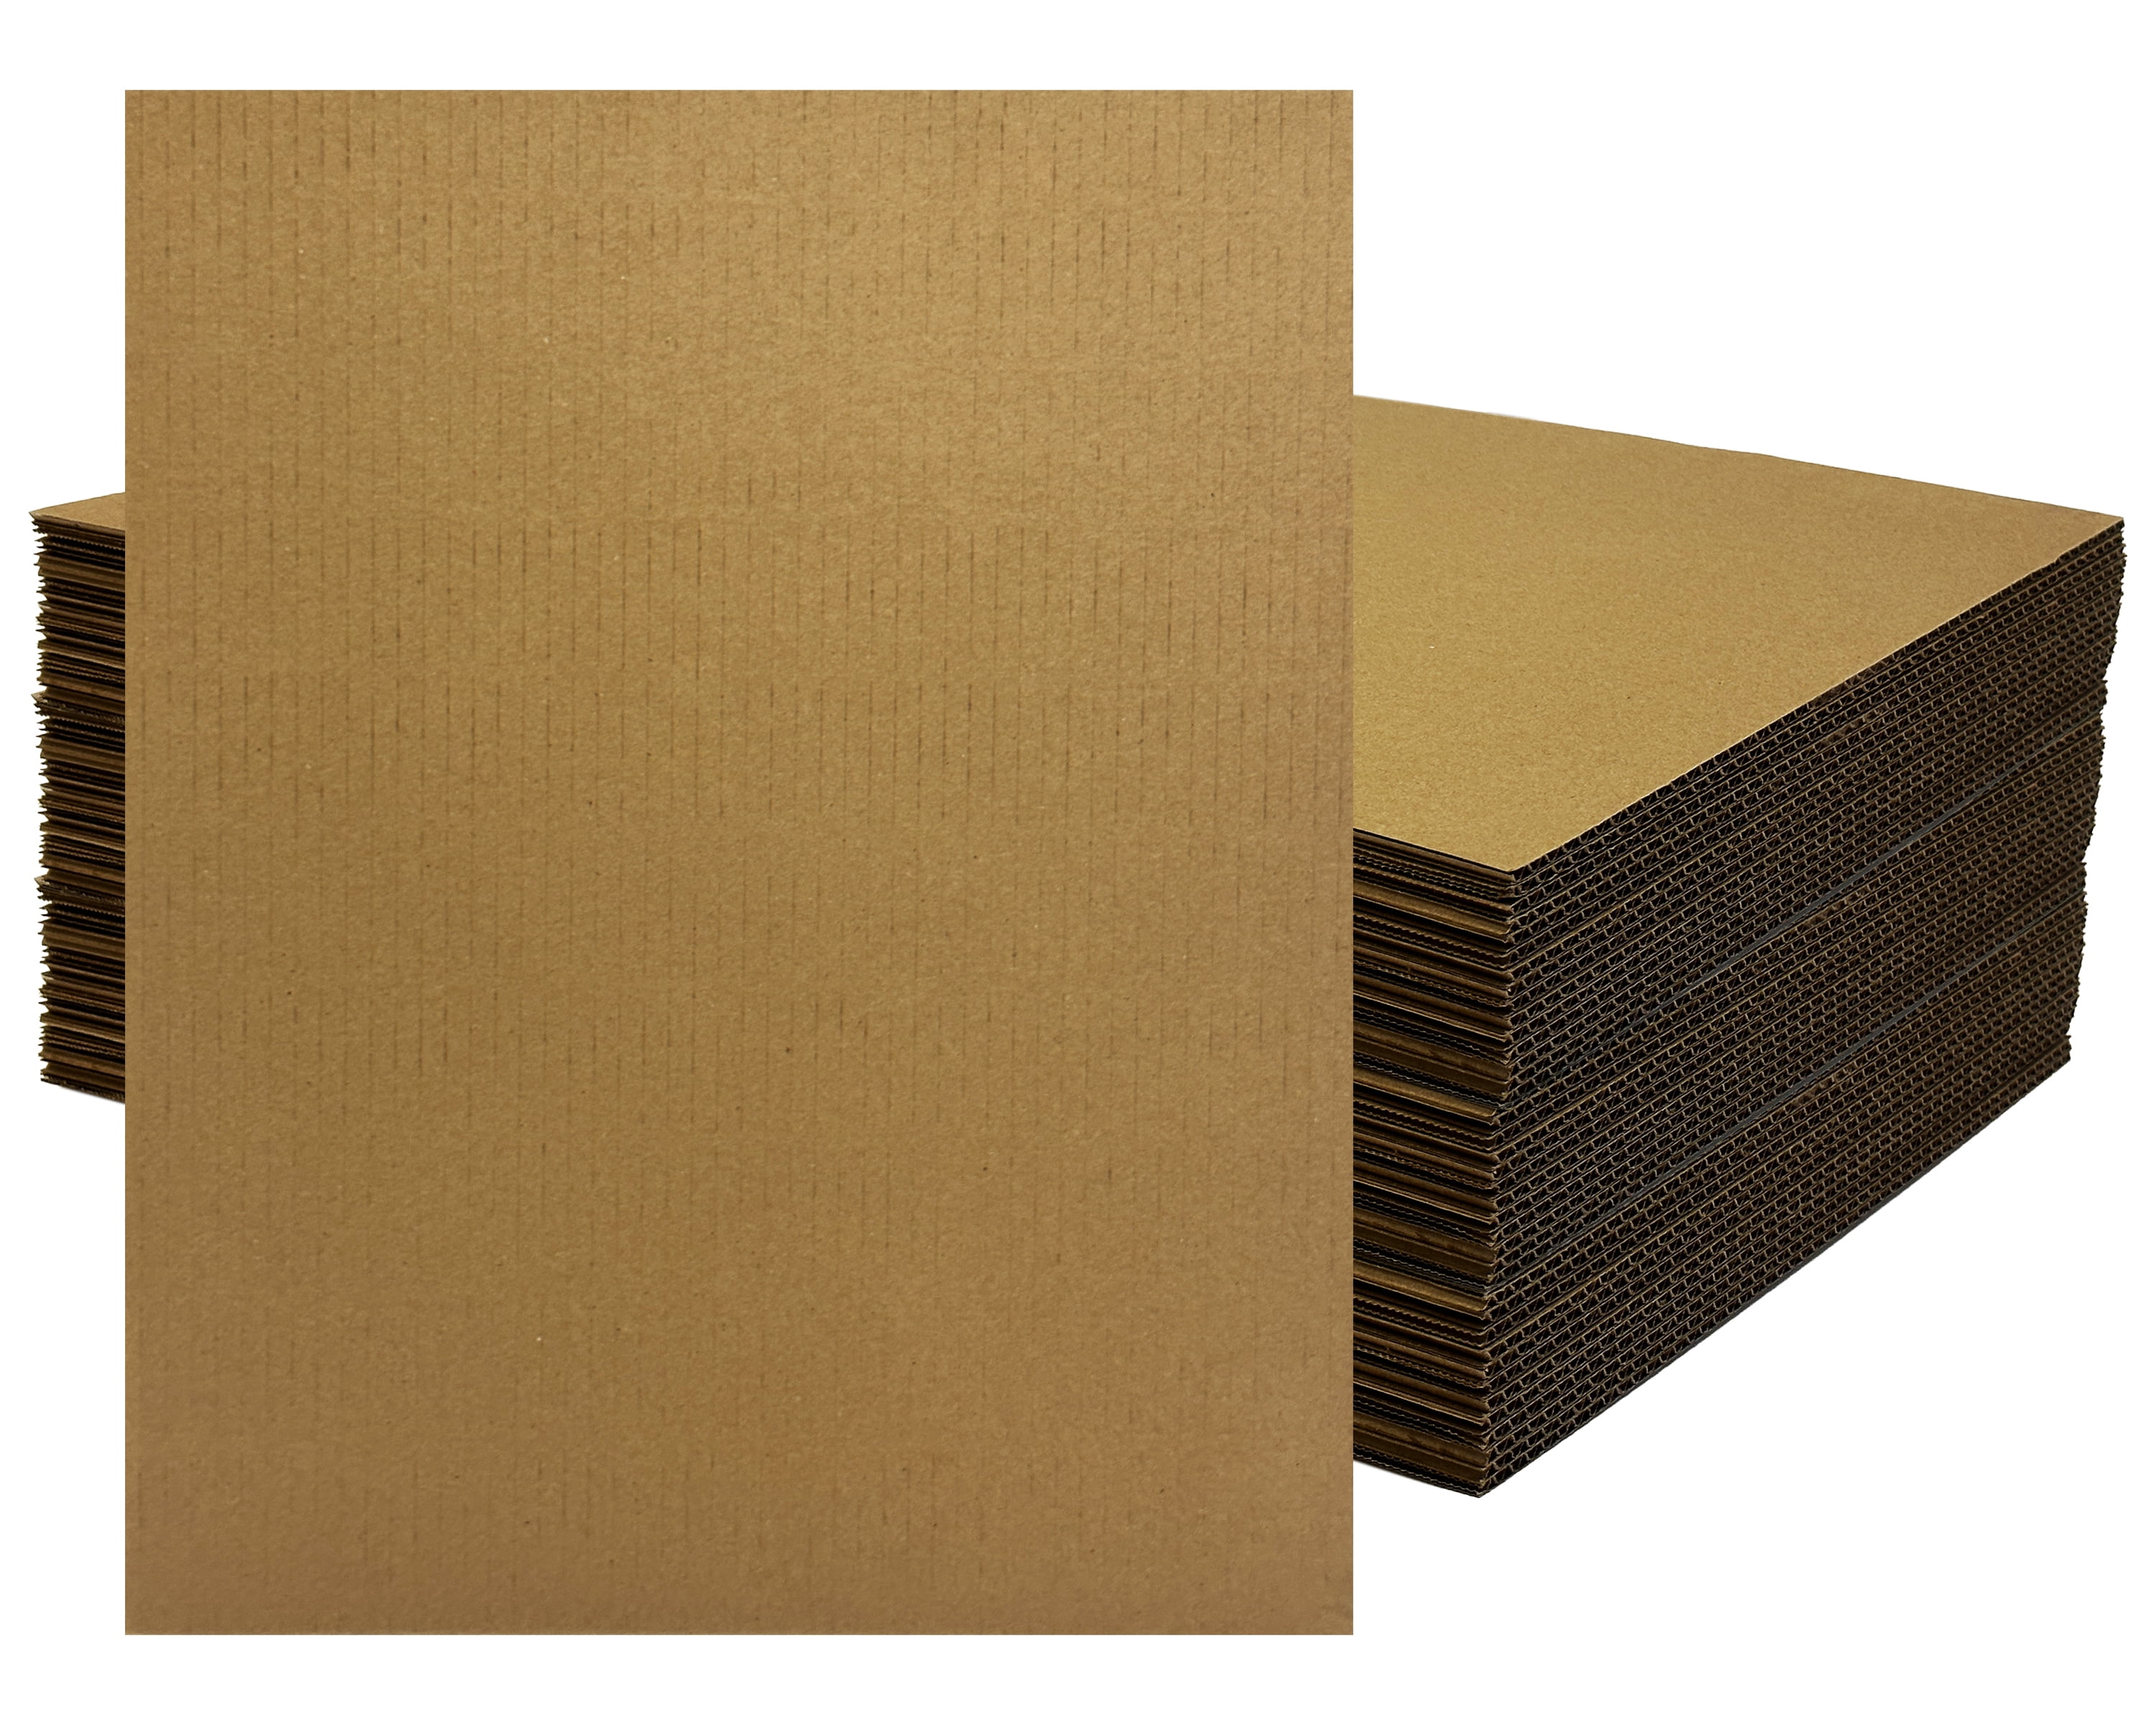 Corrugated Cardboard Sheets 4mm - 3/16 Thick 24x36- 5 Pack. Filler Insert  Pads, Brown Frame Backing Rectangular & Square Flat Boards for Art&Crafts